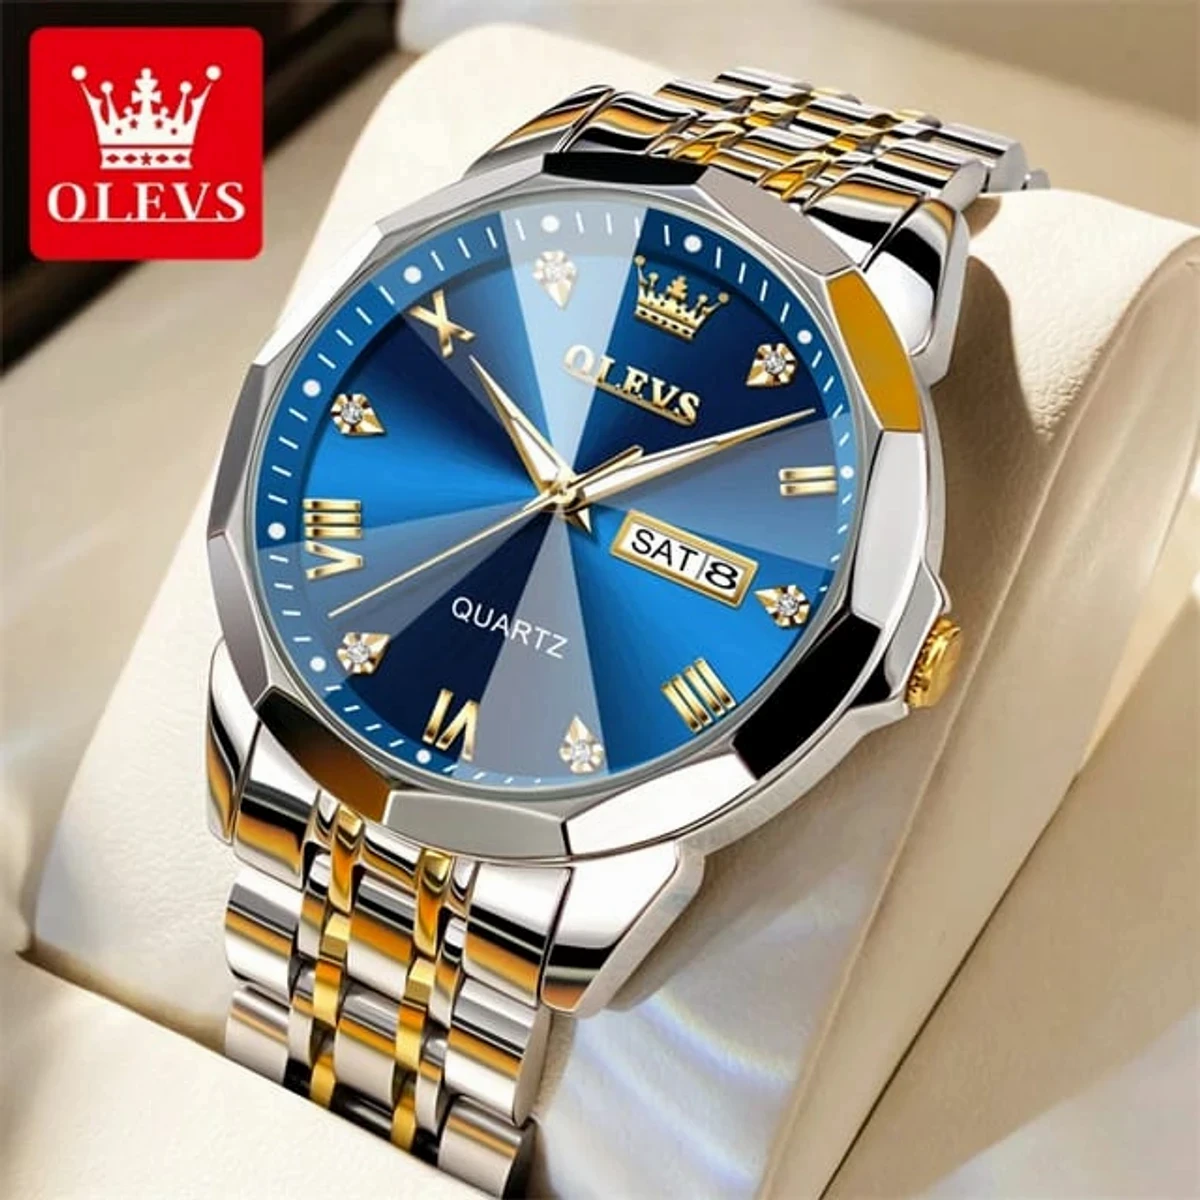 OLEVS MODEL 9931 Watch for Men Stainless Steel Watches - 9941 TOTON AR DIAL BLUE - MAN WATCH - LOCK PUSH